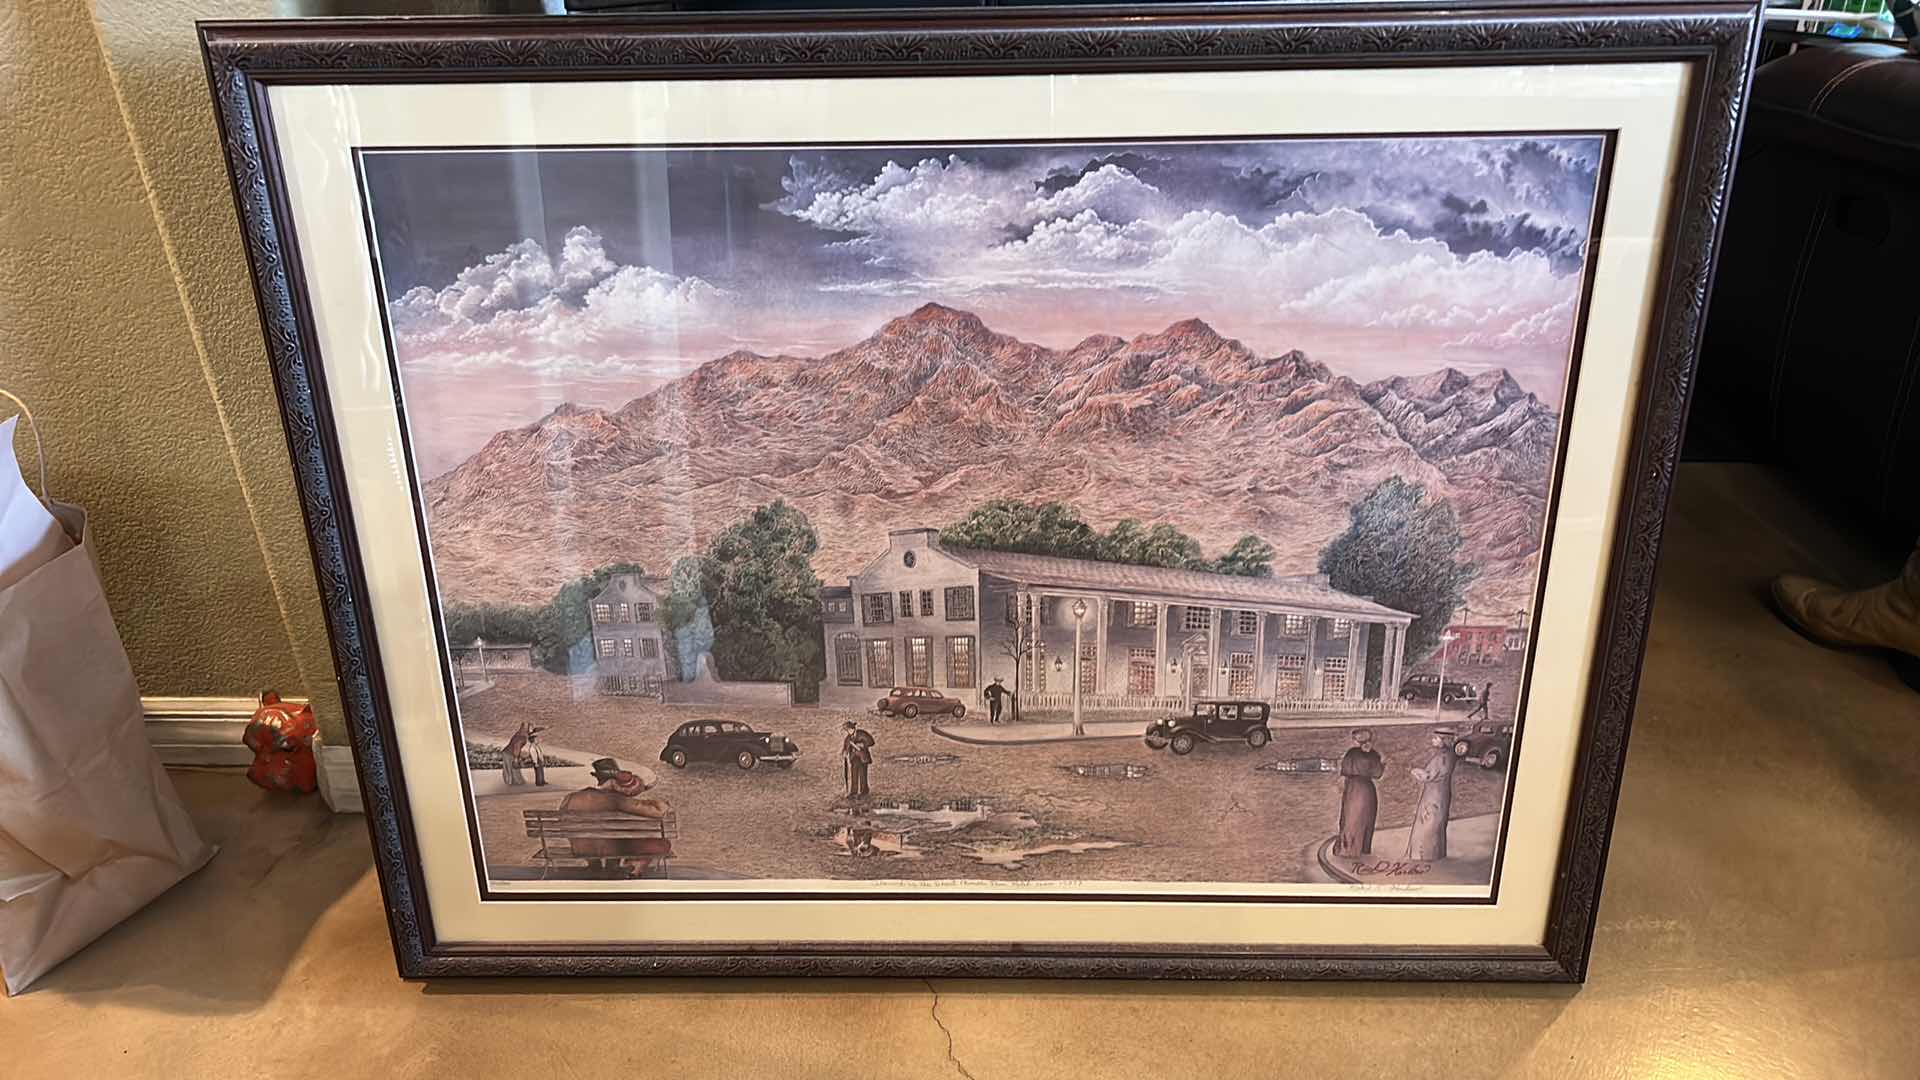 Photo 6 of WALL DECOR - SIGNED NUMBERED’ “DIAMOND IN THE DESERT BOULDER DAM HOTEL CIRCA 1937 FRAMED ARTWORK 43” x 32”